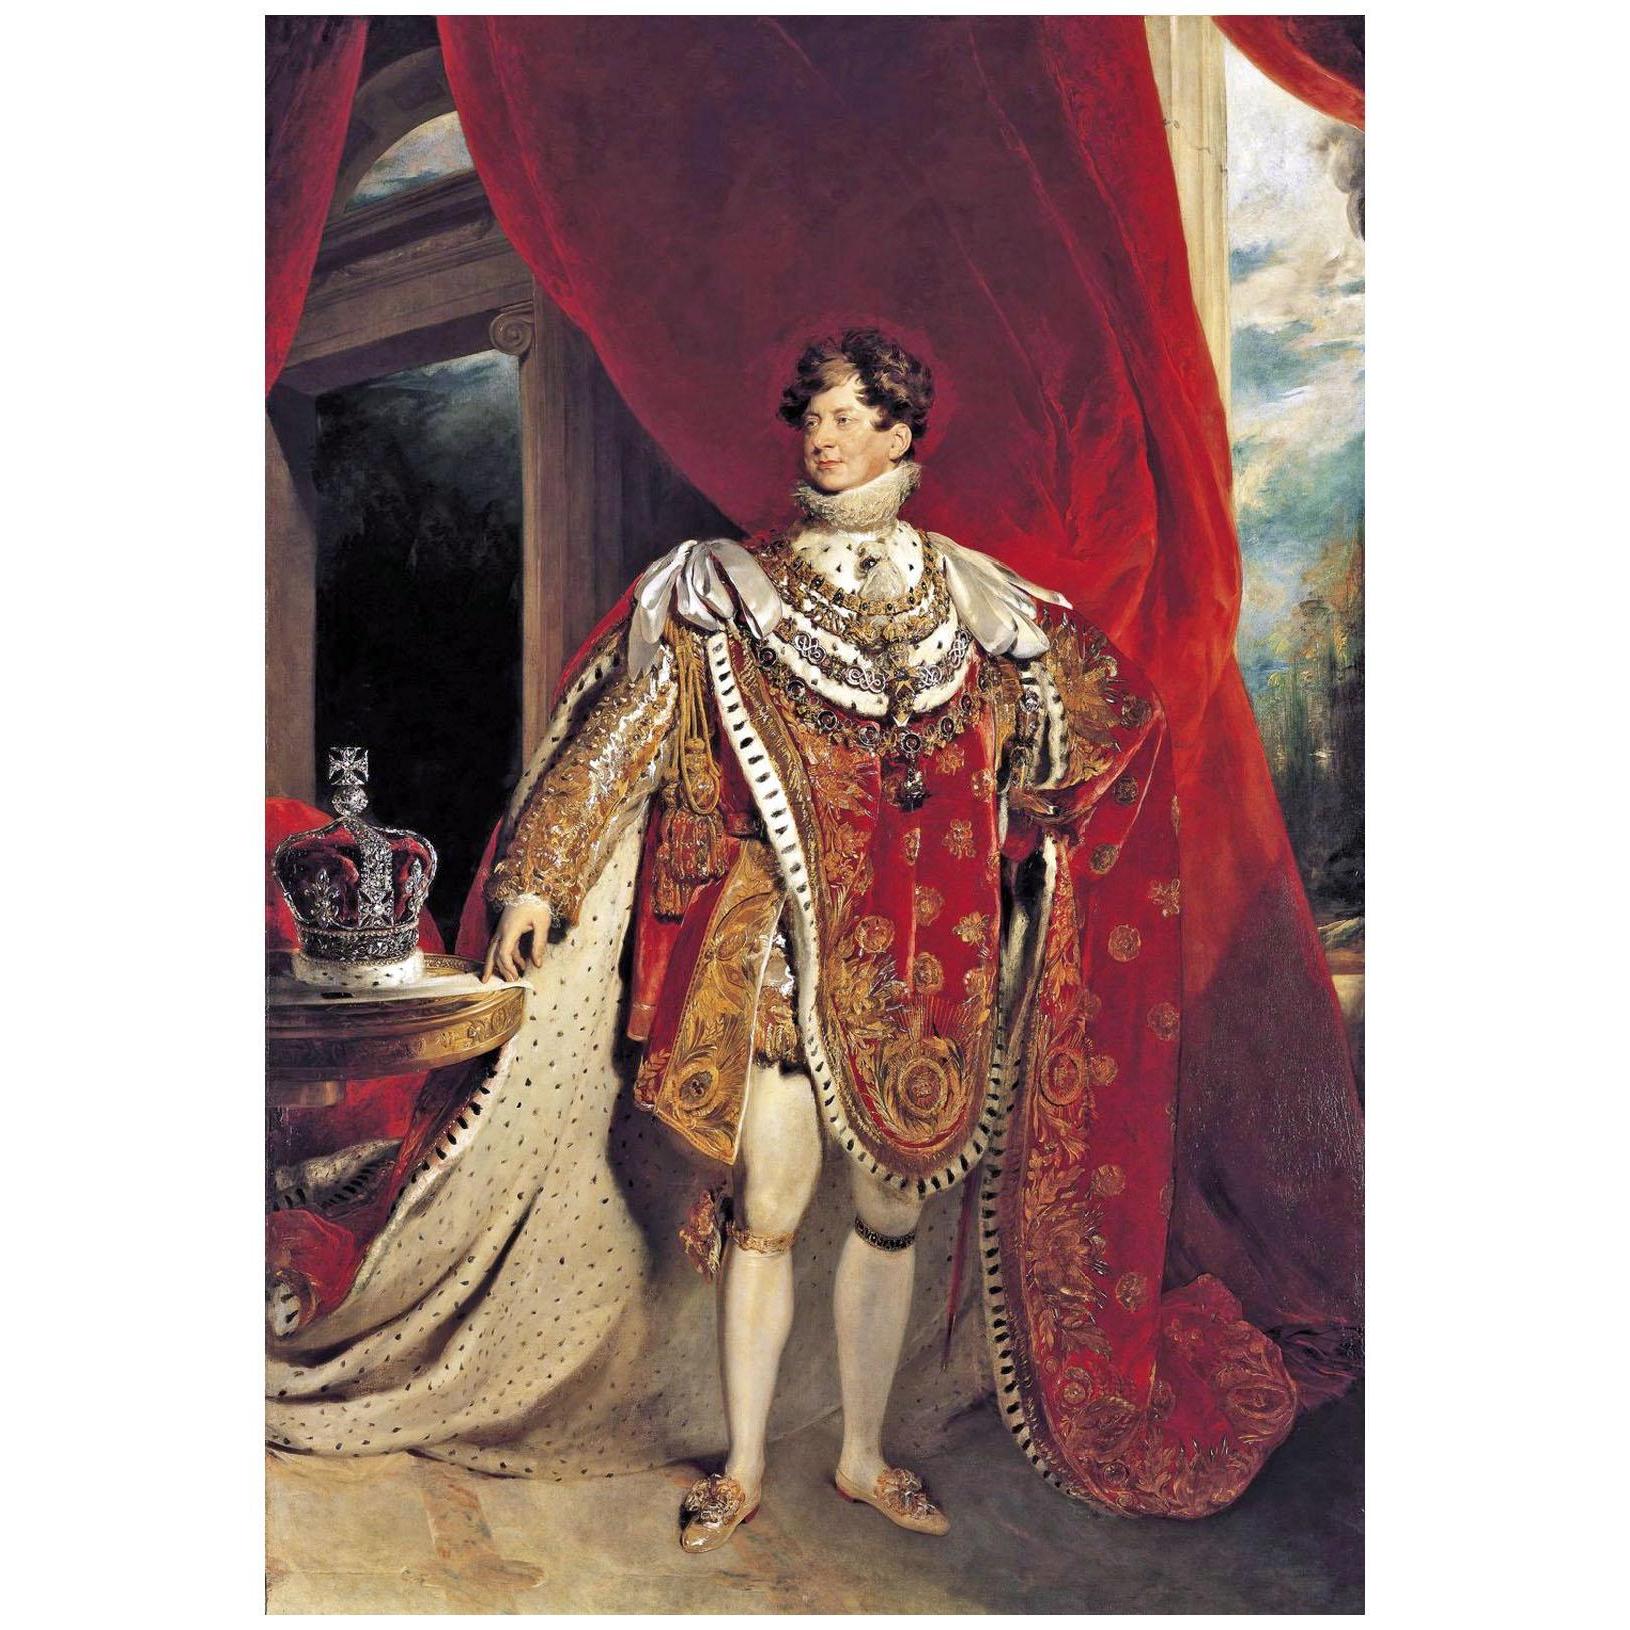 Thomas Lawrence. Coronation portrait of George IV. 1821. Royal Collection London